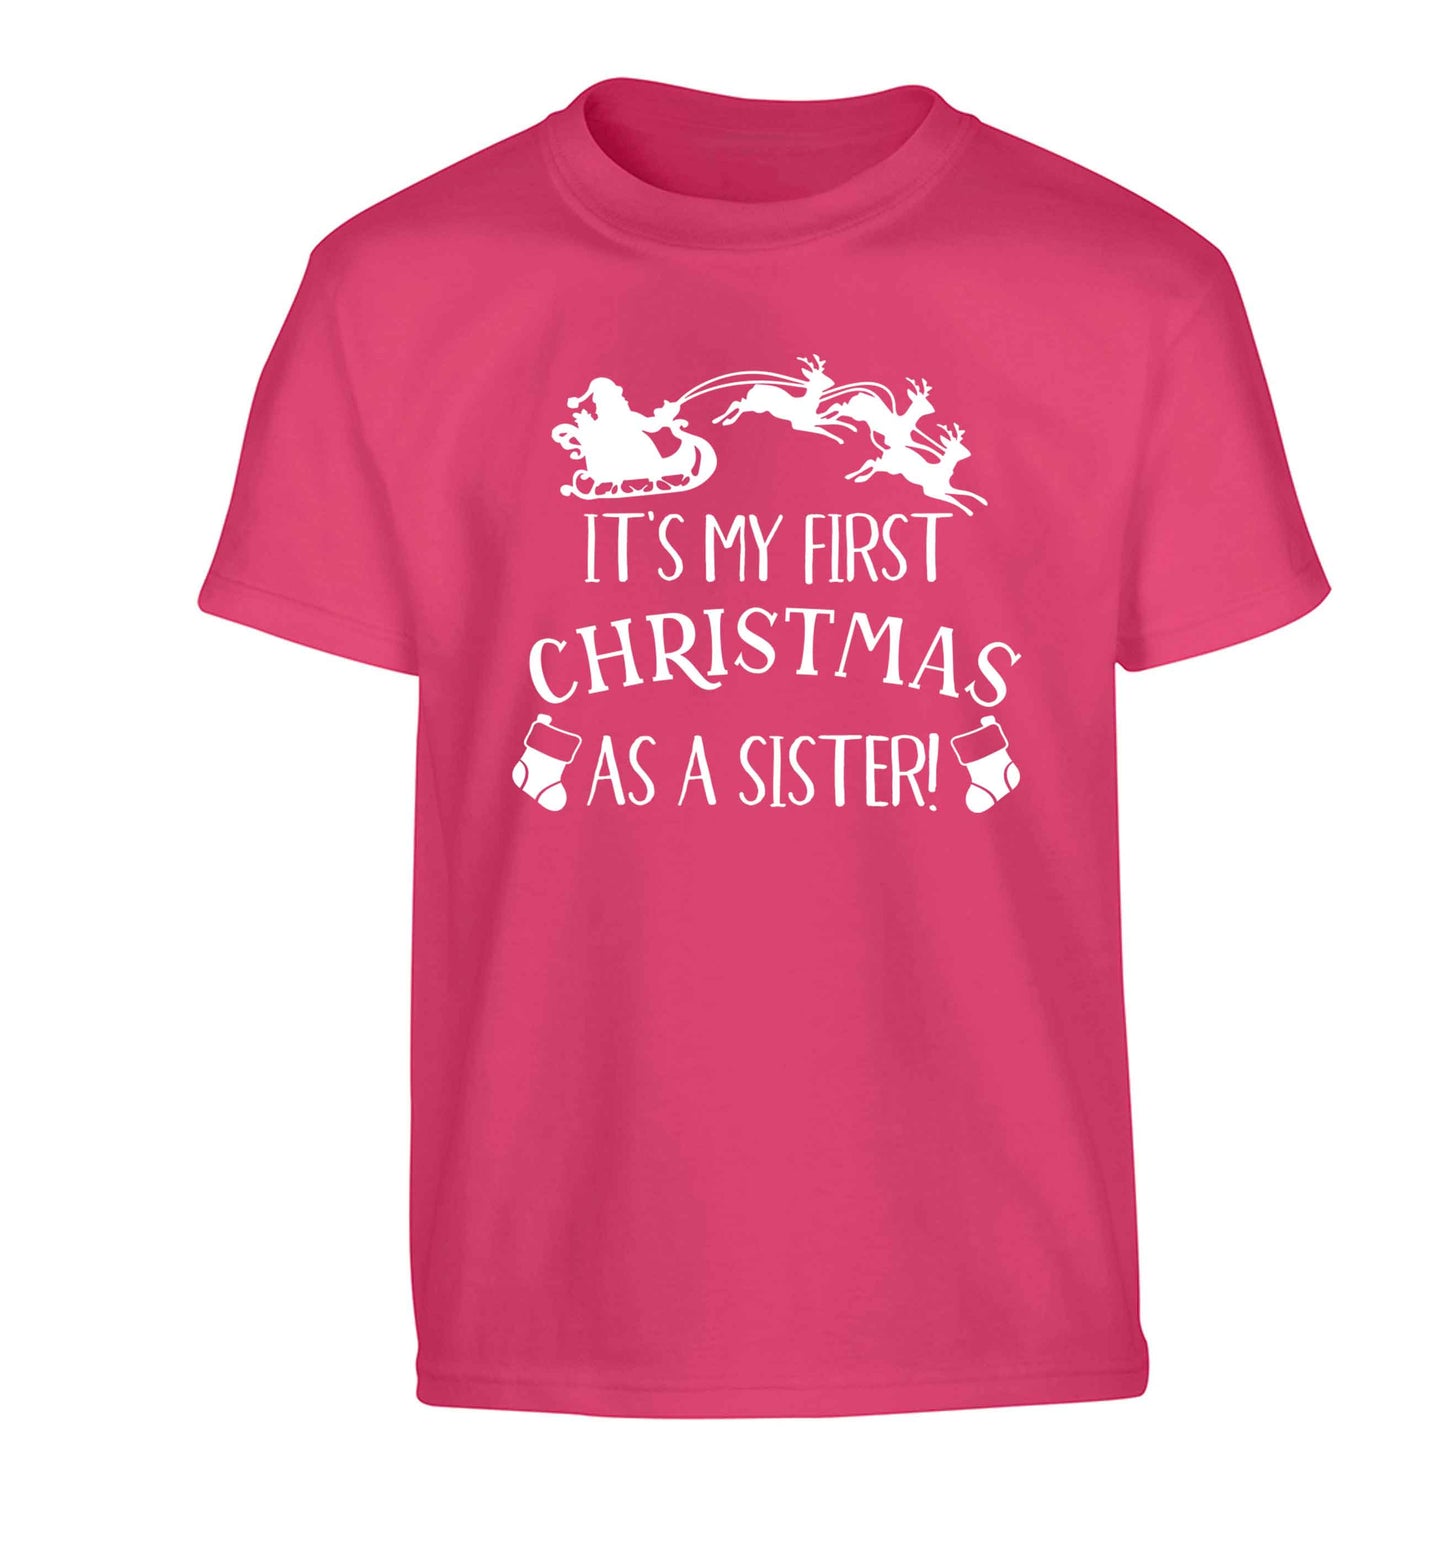 It's my first Christmas as a sister! Children's pink Tshirt 12-13 Years